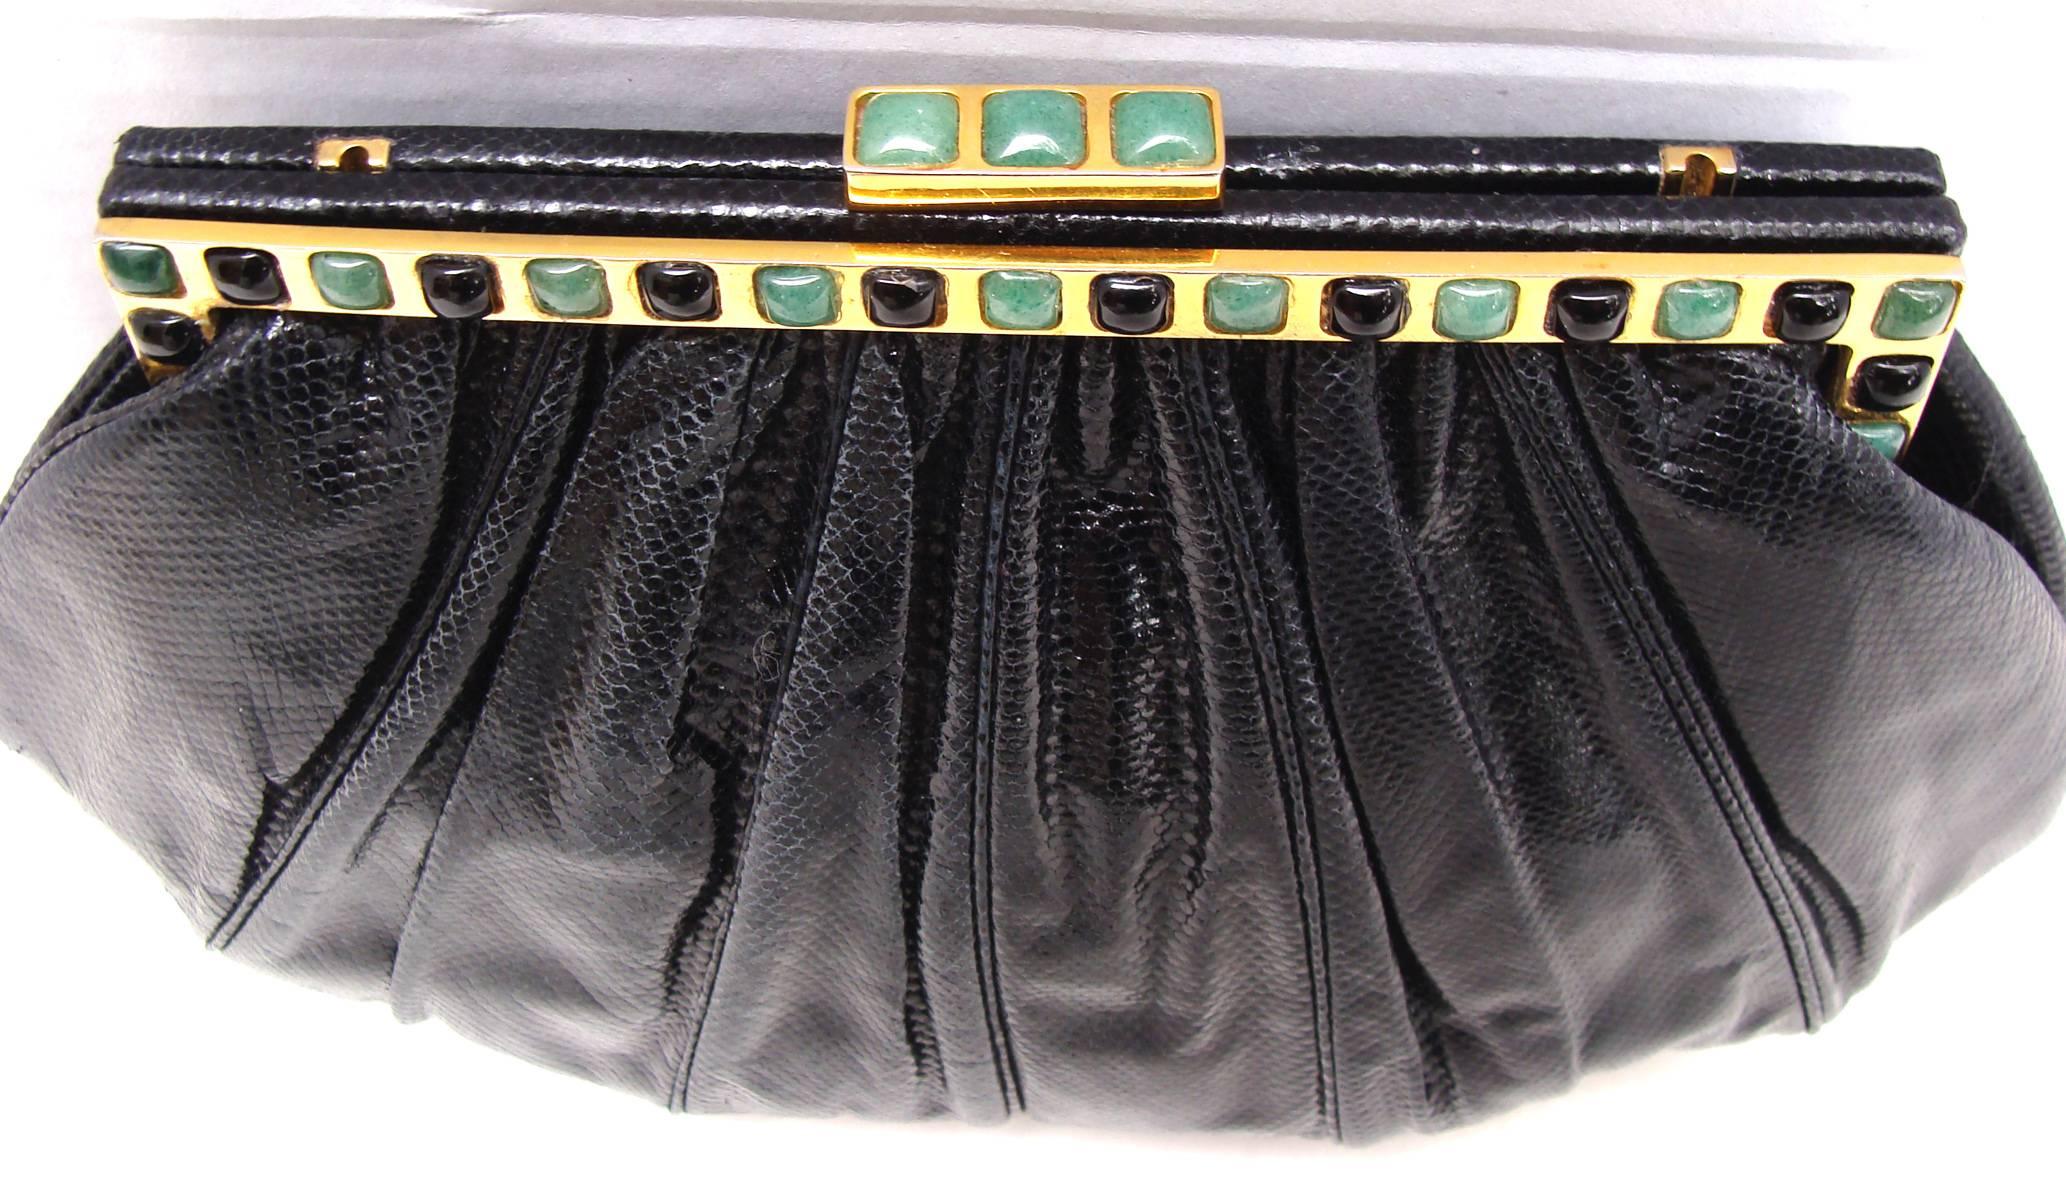 This is a timeless classic Judith Leiber evening bag in black karung with what appears to be jade and onyx style stones inlaid into the frame and clasp.  

The genuine karung exterior has a ruched effect with six vertical panels on the front and